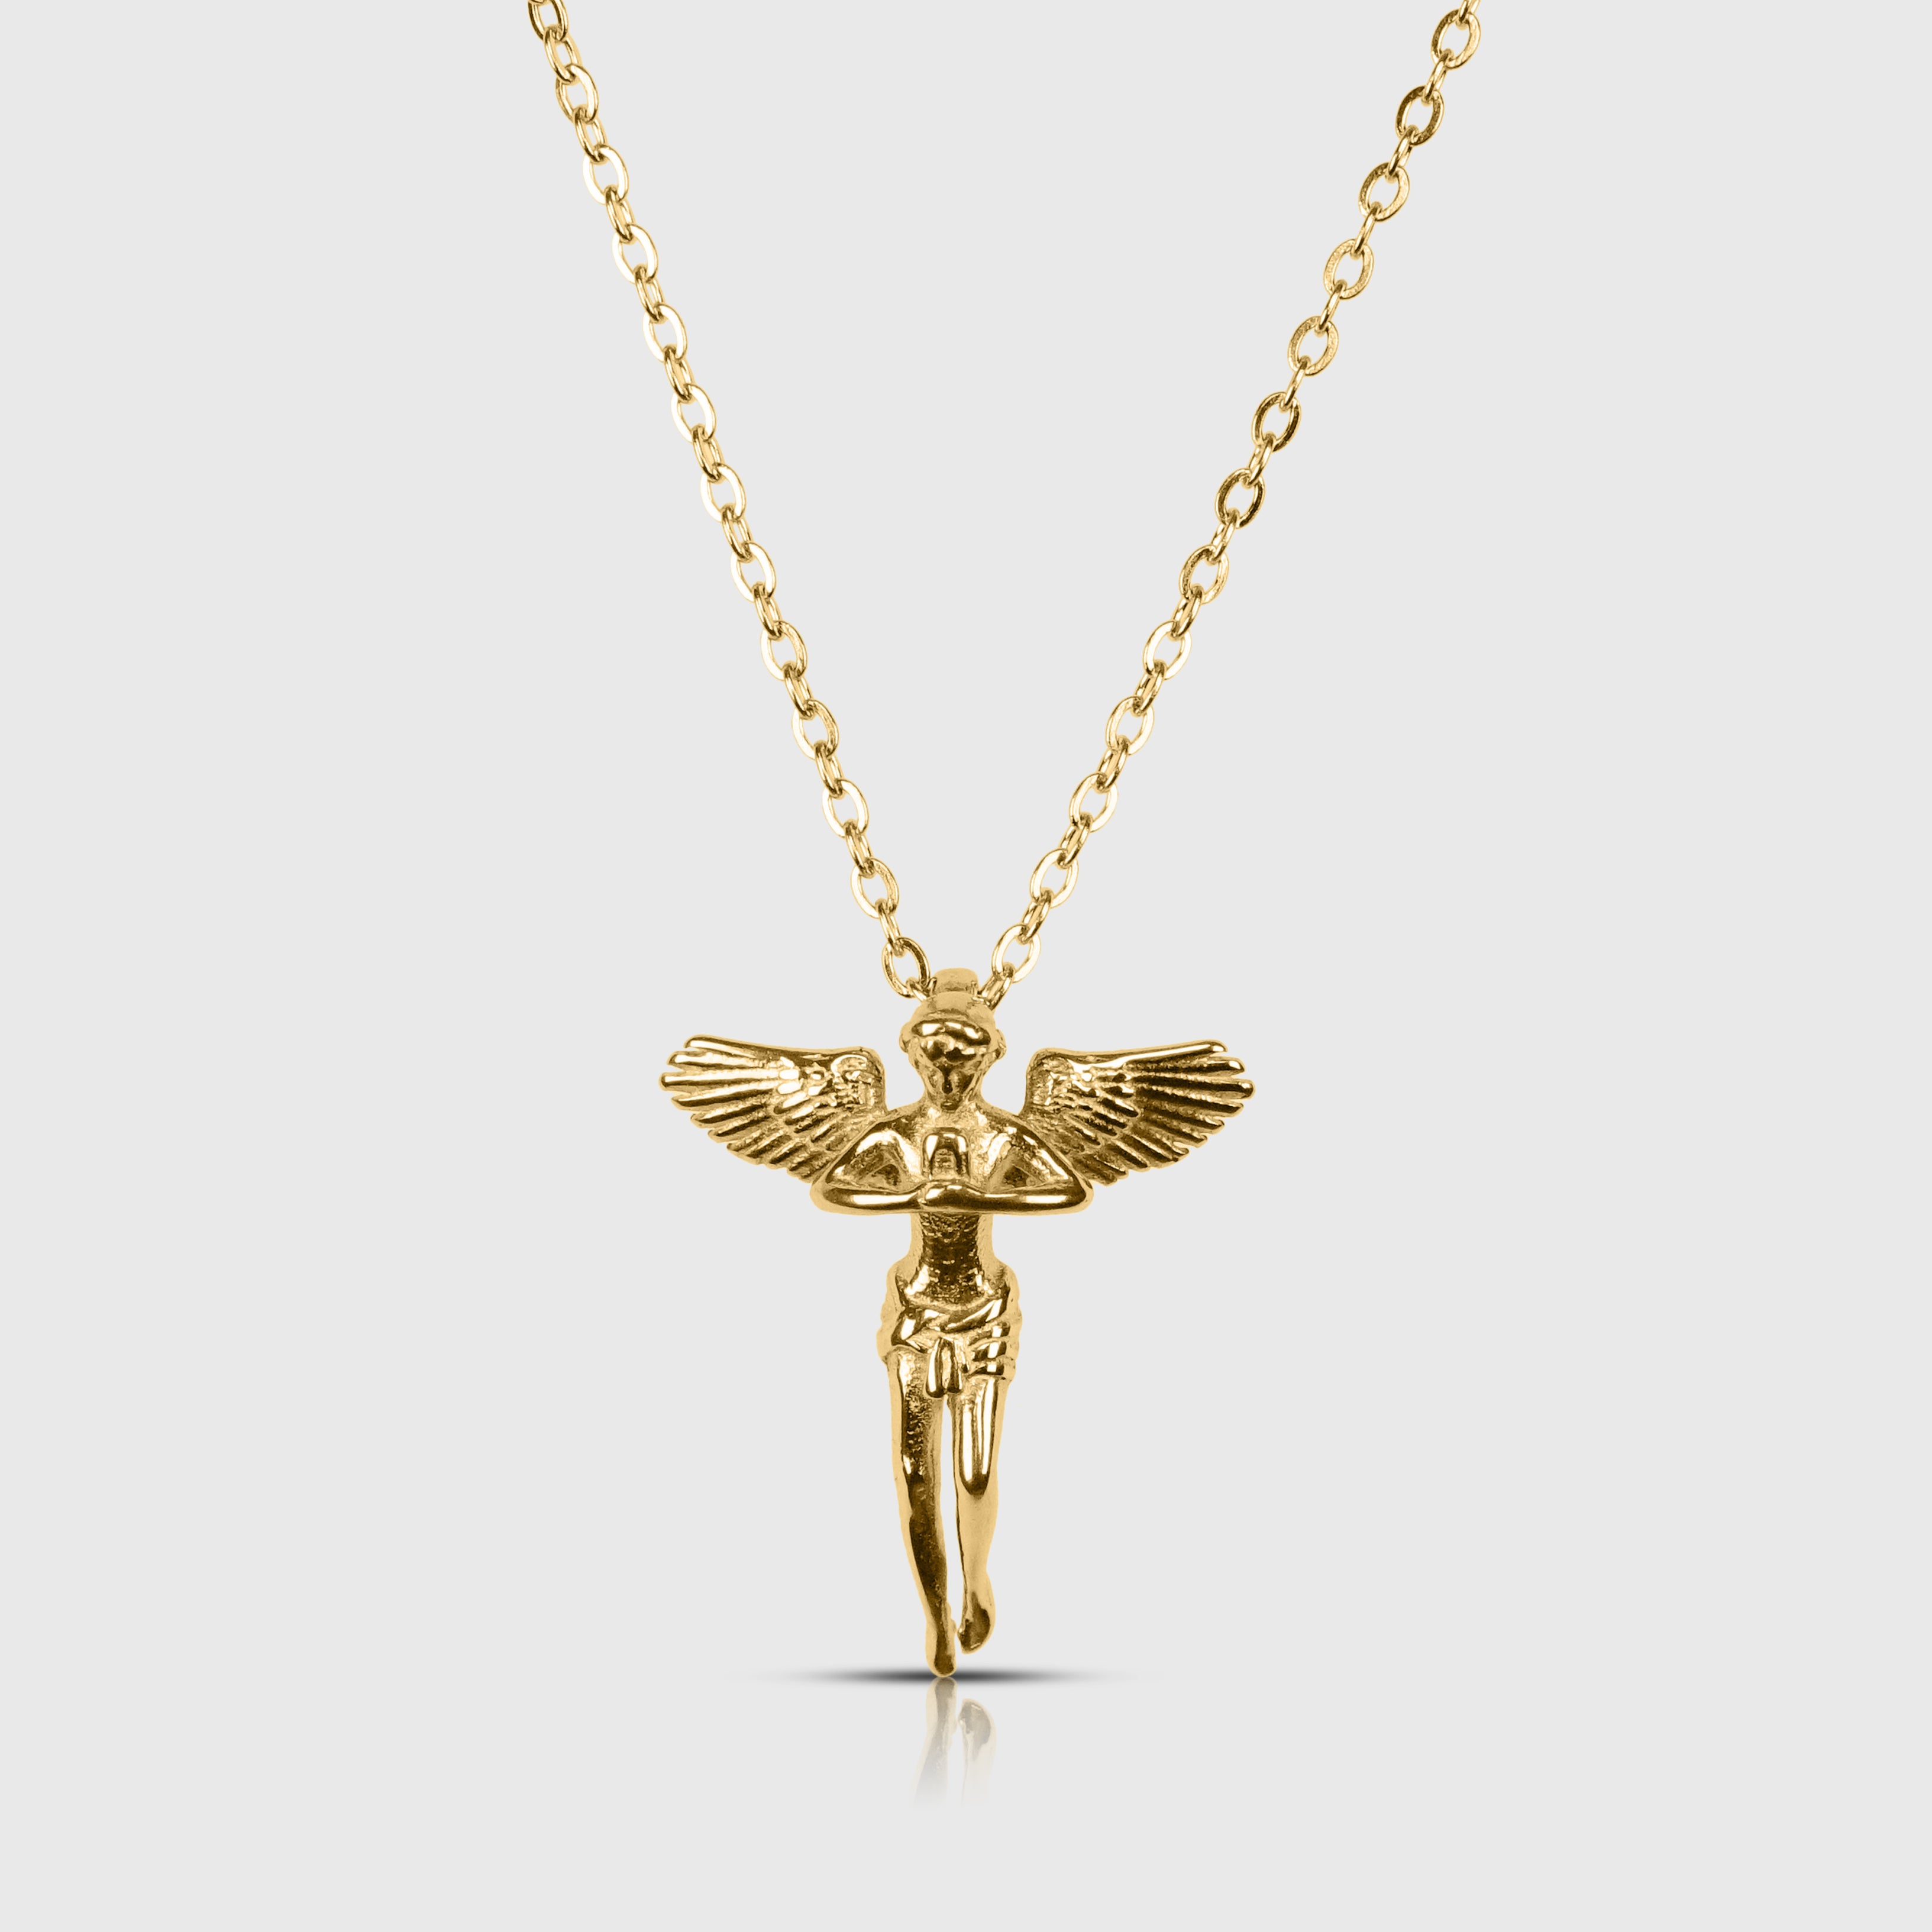 FLYING ANGEL NECKLACE - GOLD TONE